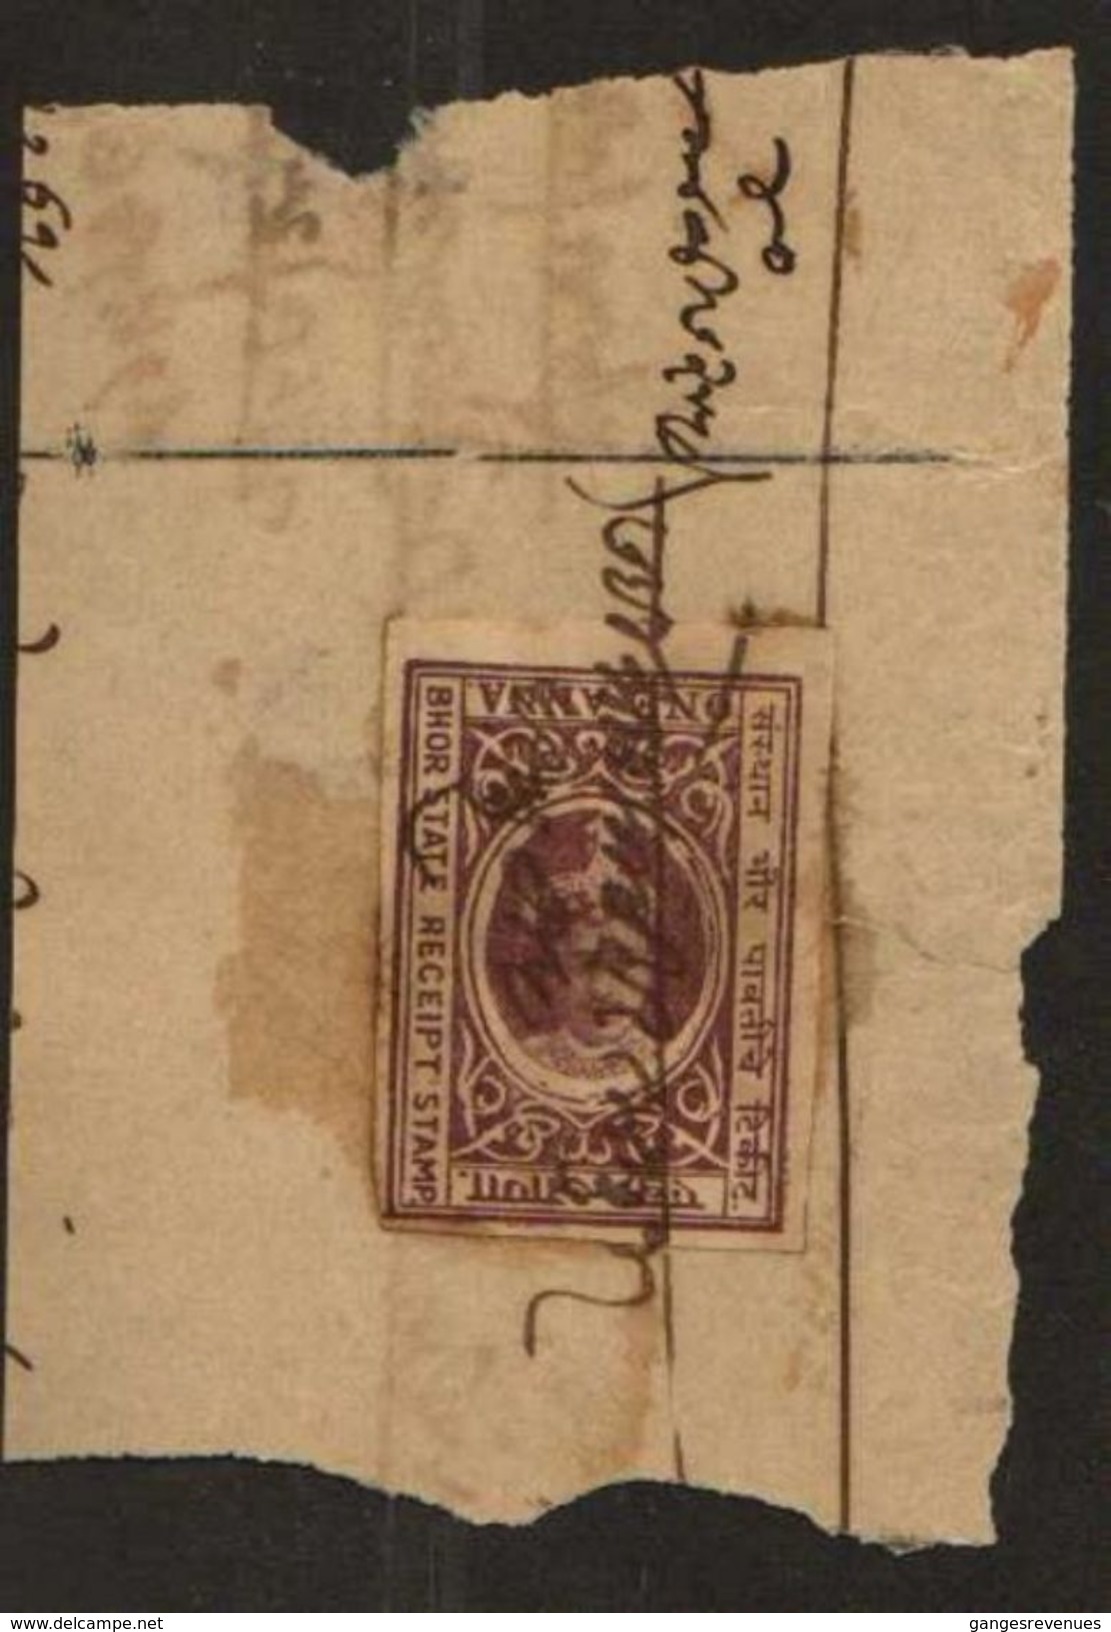 BHOR State India INVERTED HEAD Error 1A  Violet Brown Revenue Type 10 CV $ 1500  # 97868 Inde Indien Fiscal - Bhor